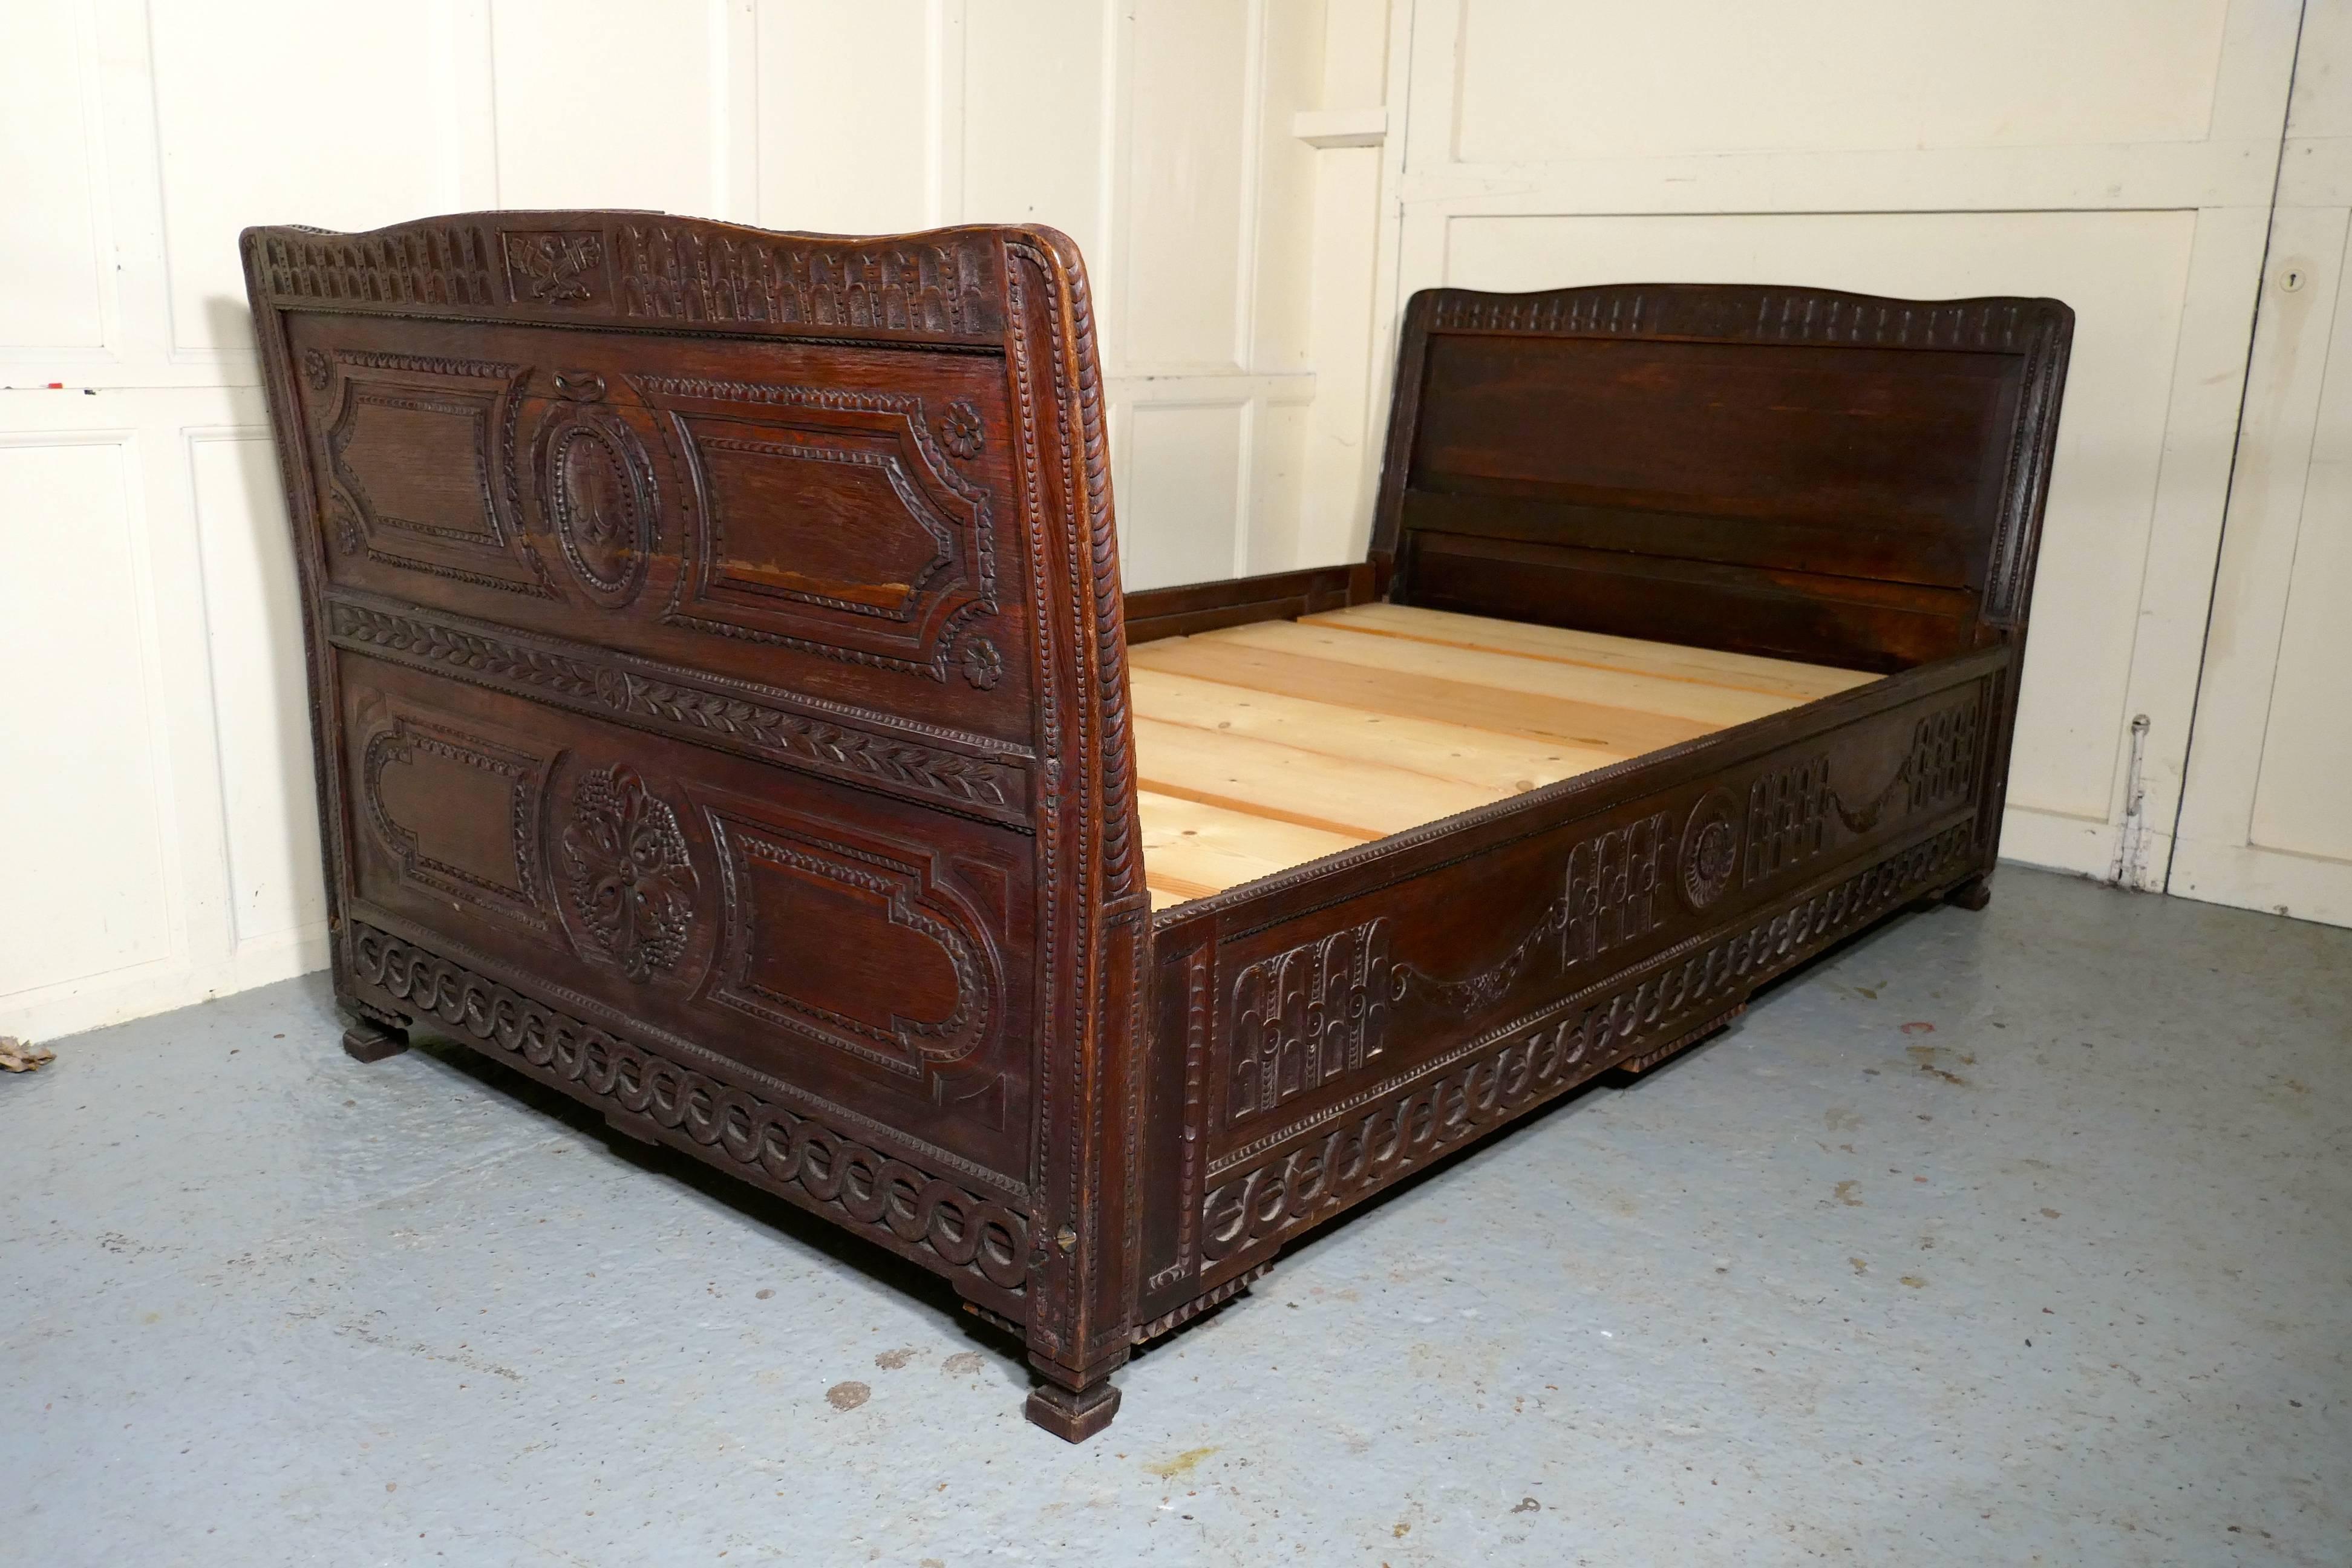 19th century carved oak day bed or ships sleigh bed.
 
This very unusual bed is very much in a nautical theme so it may have been taken from a ship.
The bed is made in oak and carved, both ends of the bed have an outward sweeping shape, making it